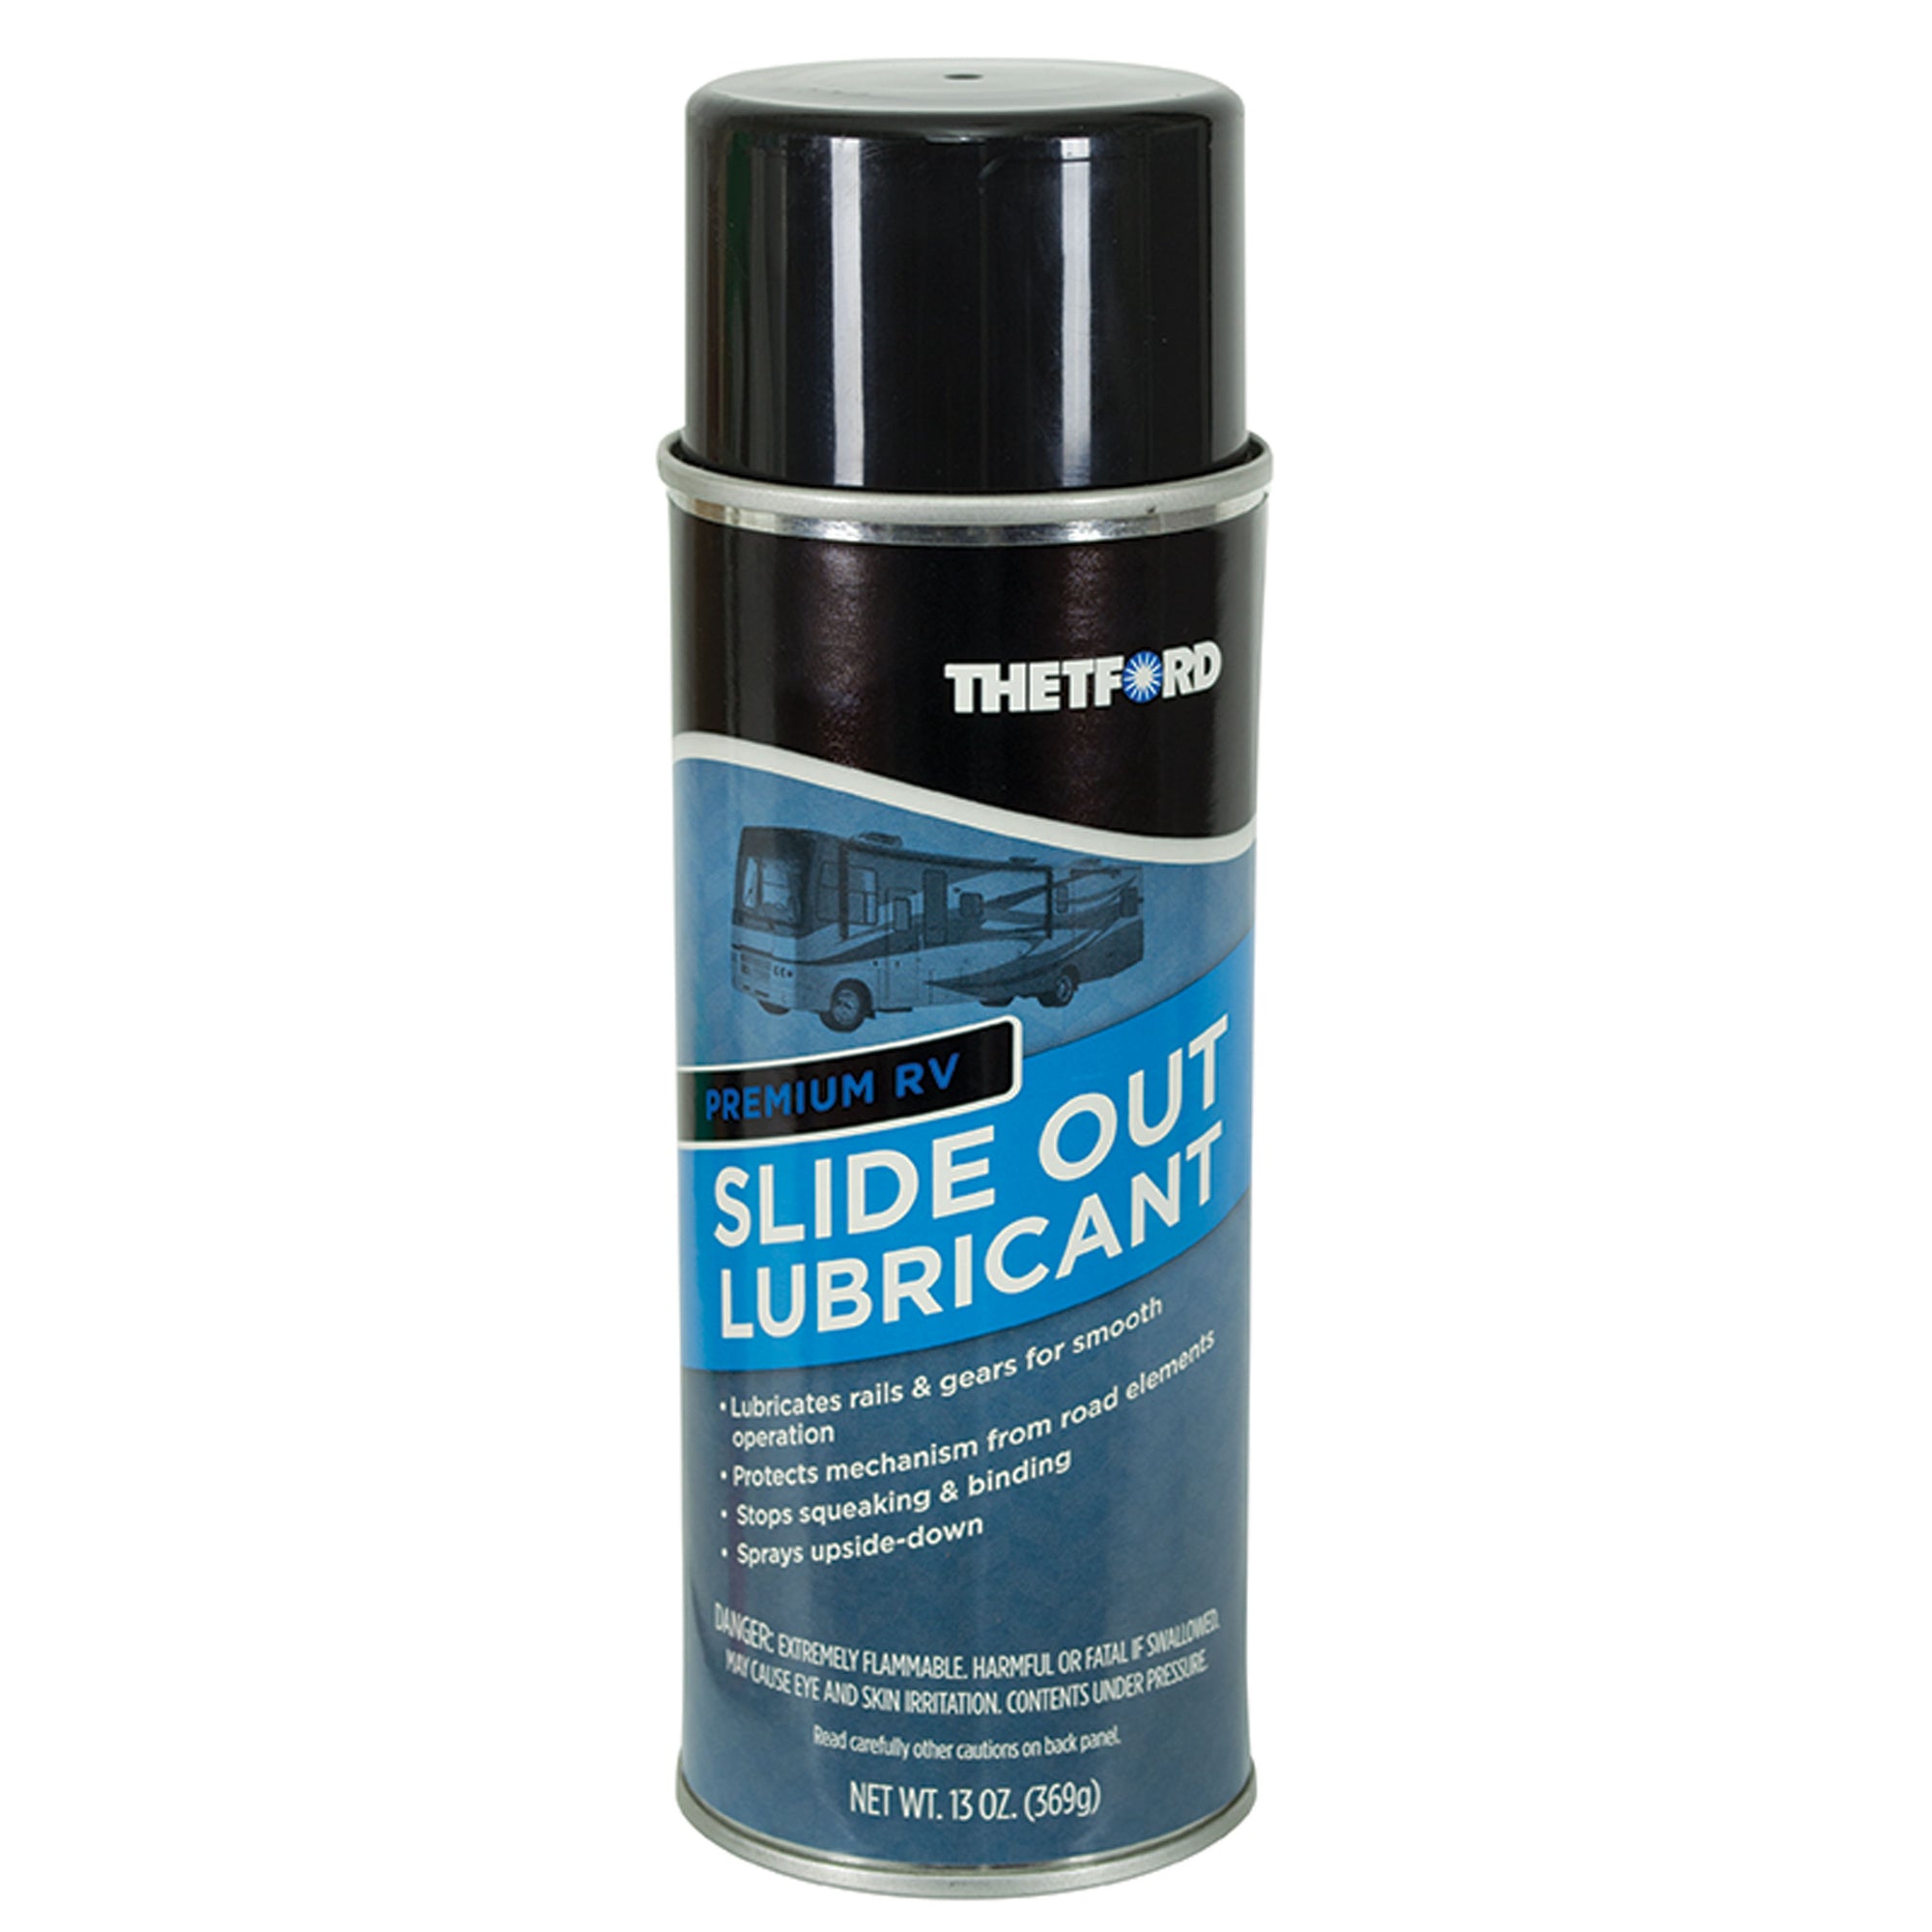 Thetford 32777 Premium Slide-Out Lubricant